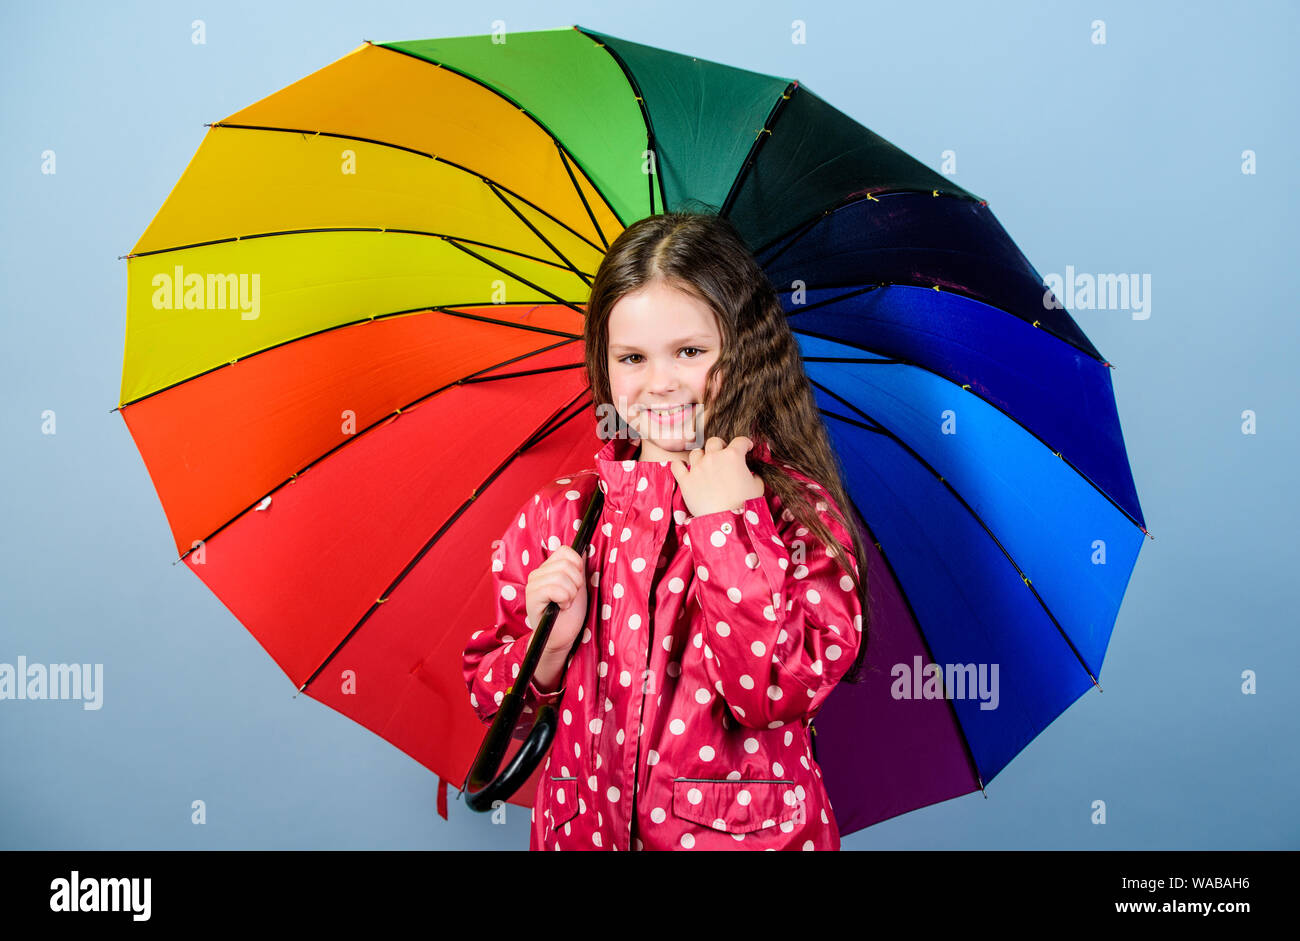 Rain Protection Rainbow Happy Small Girl With Colorful